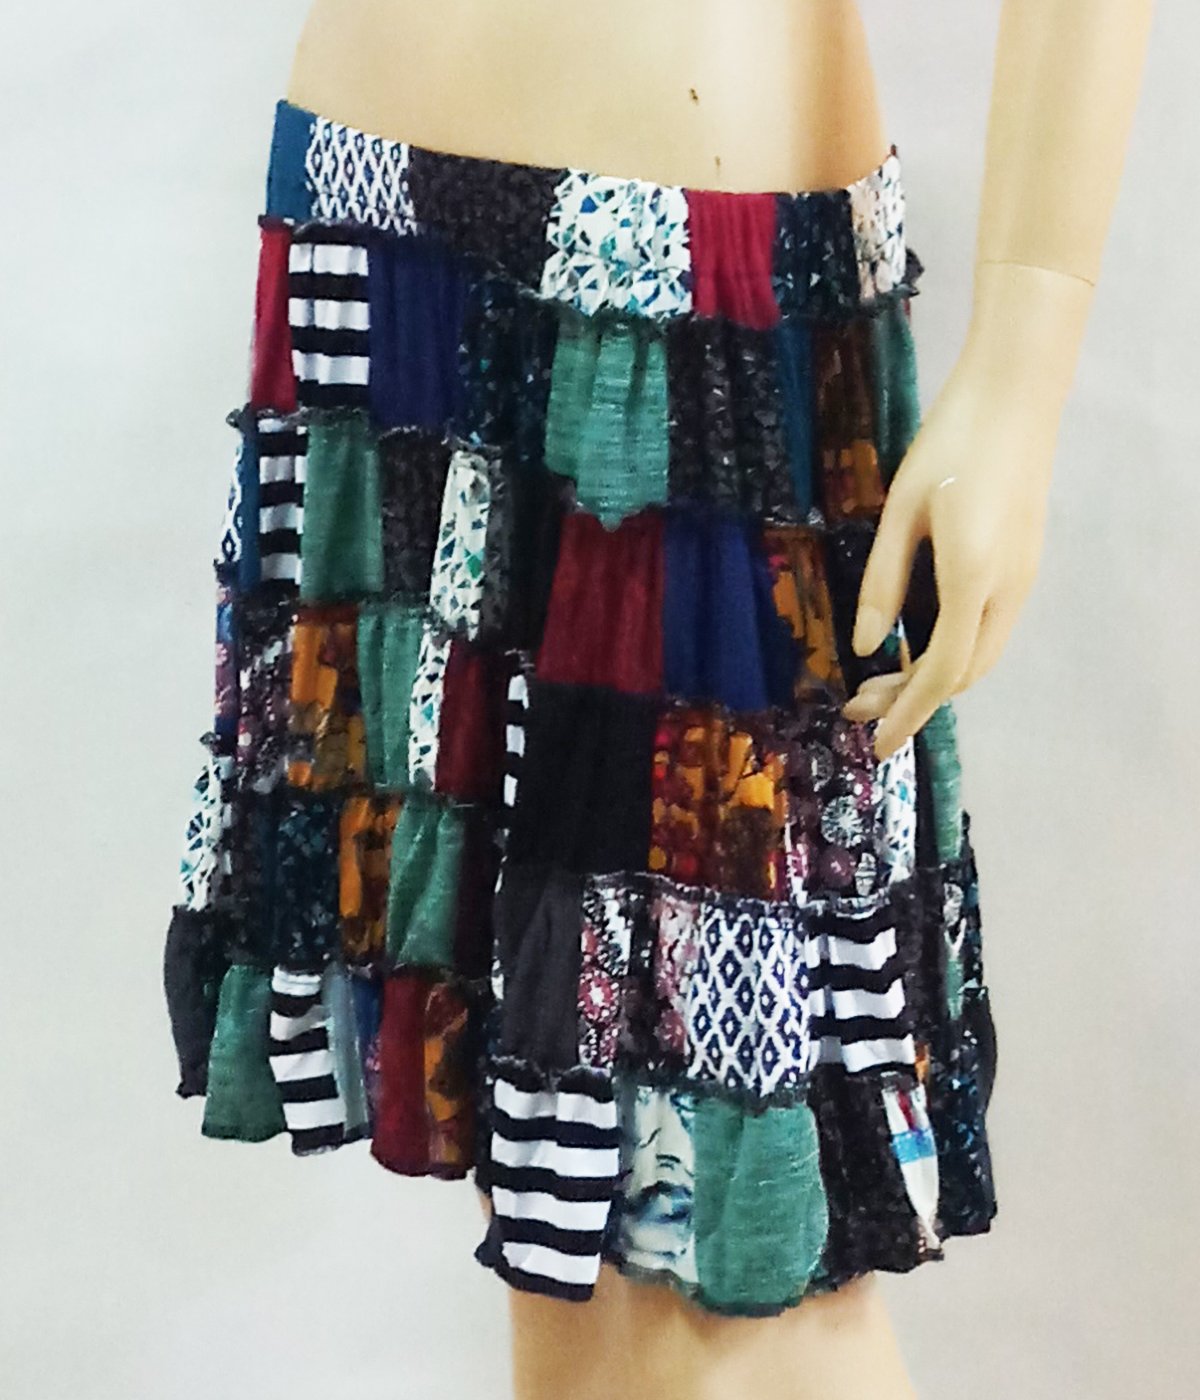 Eco-Products / Patchwork Skirts / Summer Skirts